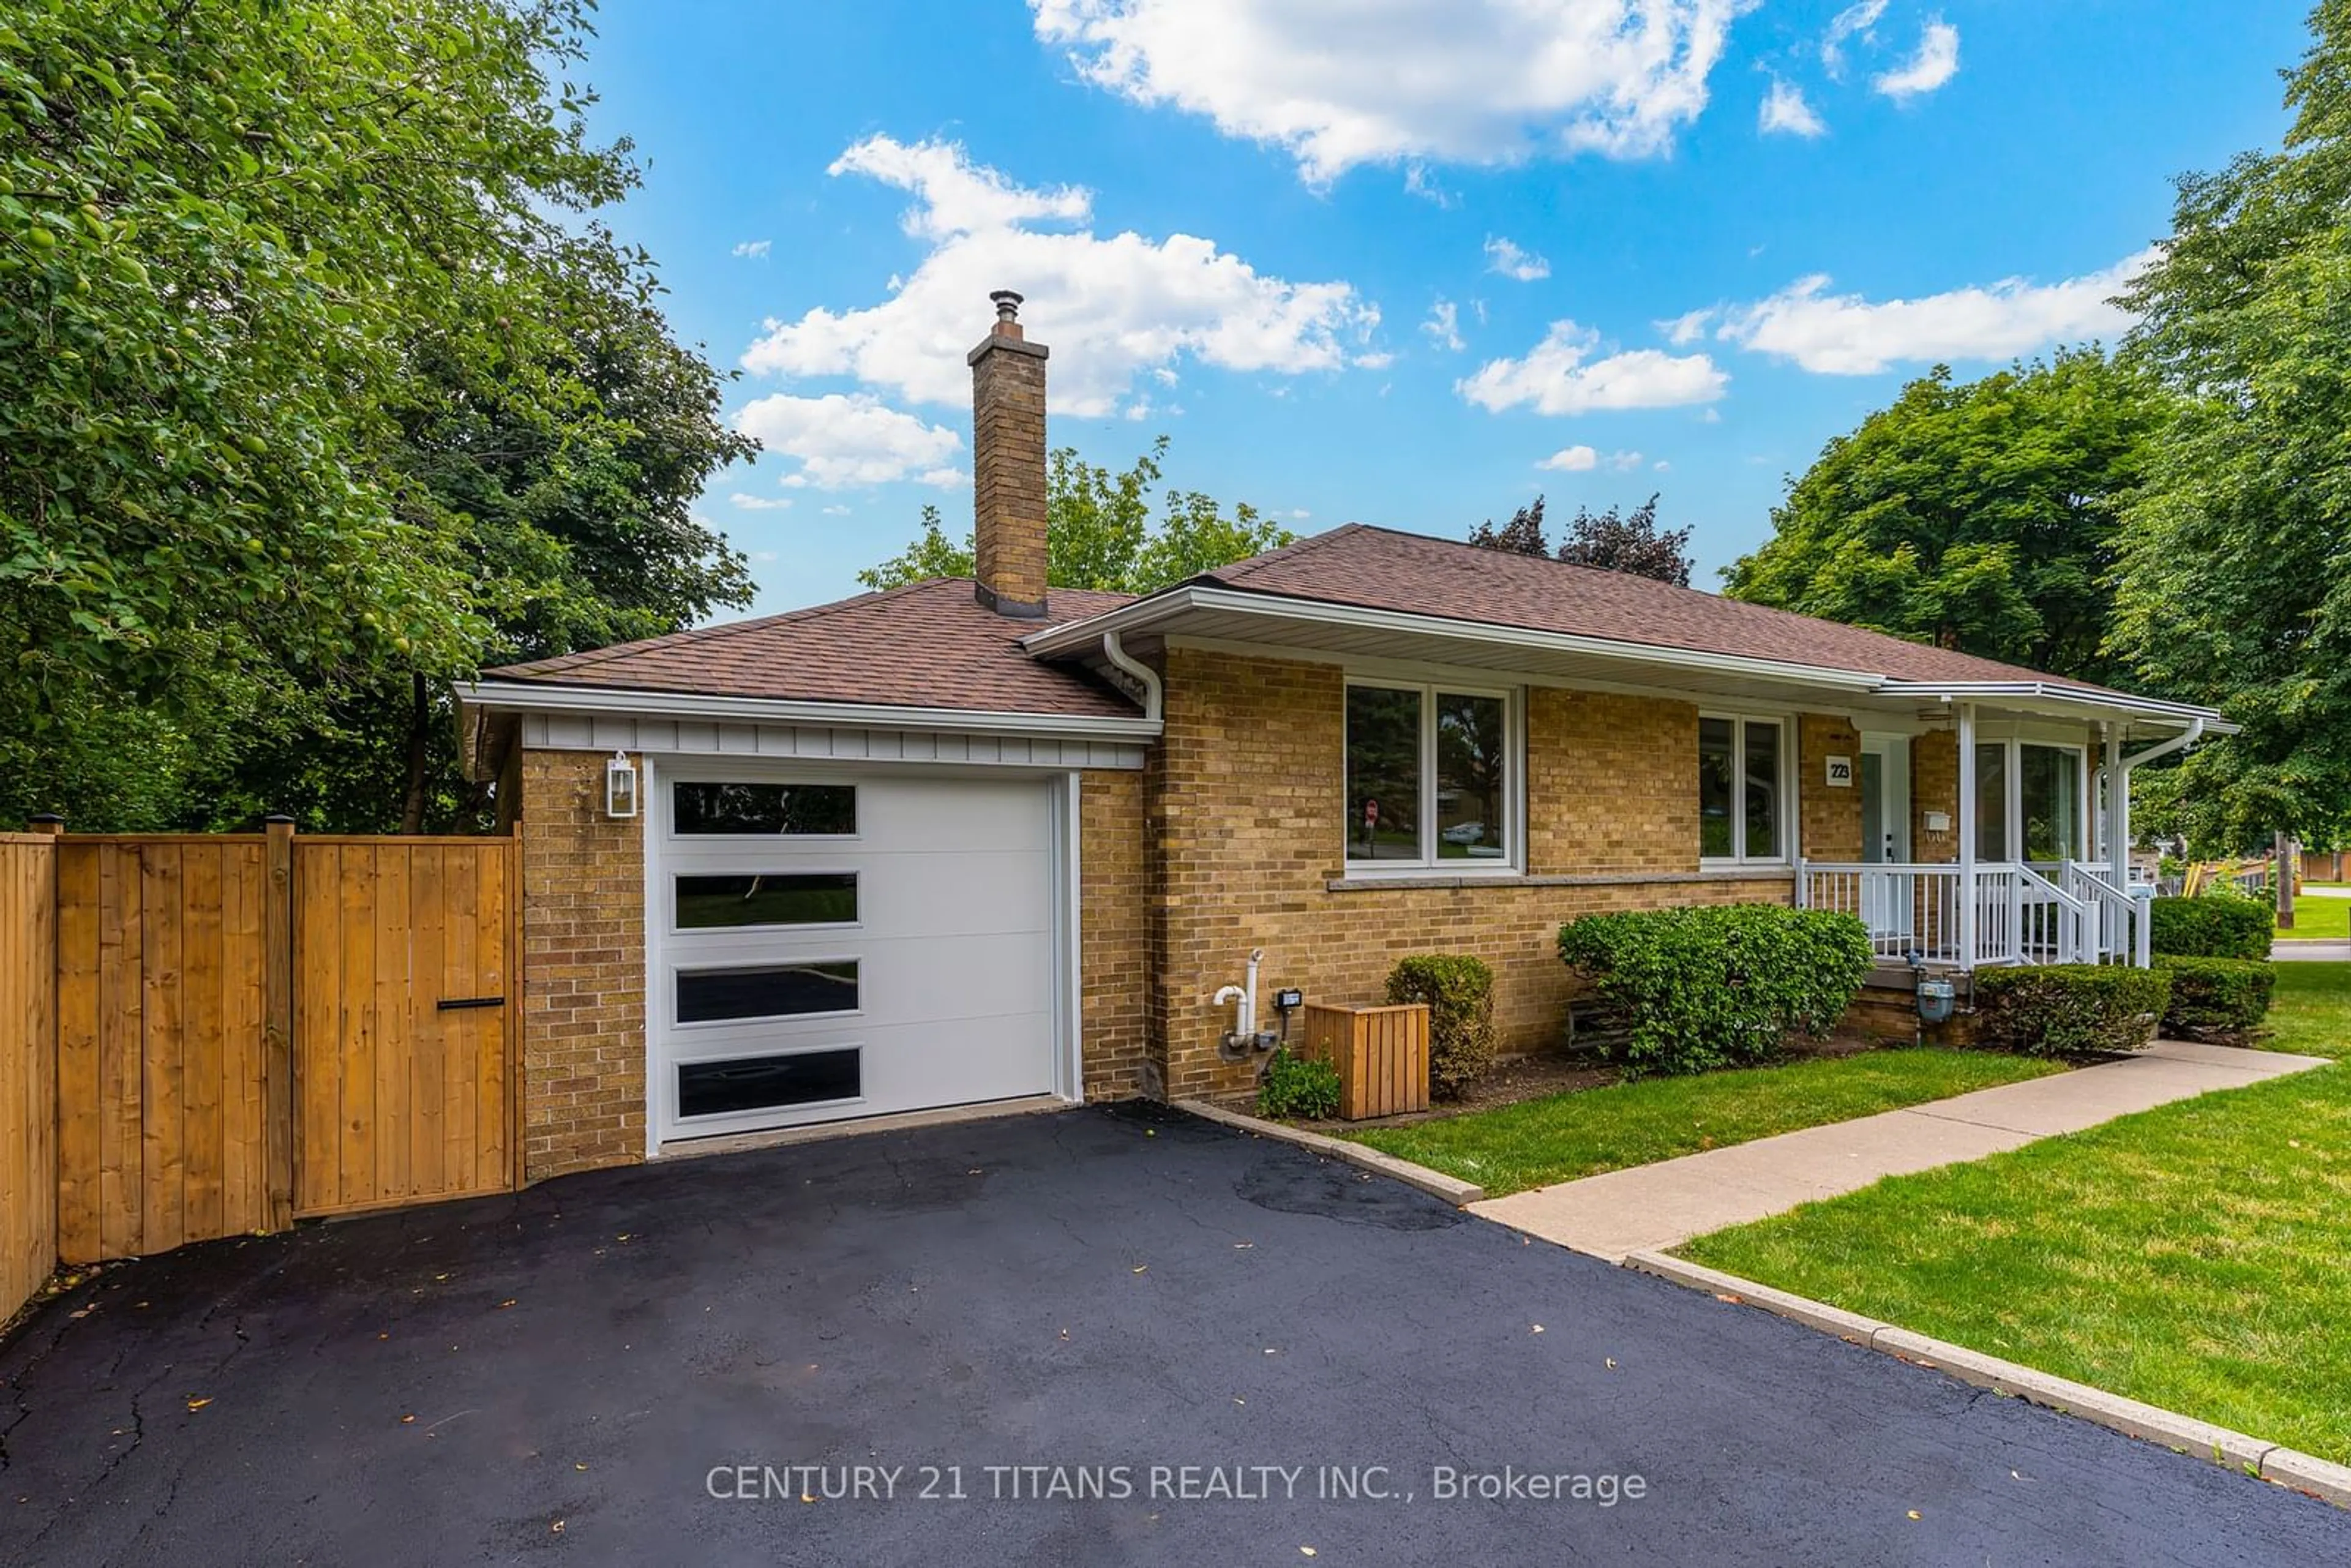 Home with brick exterior material for 223 Epsom Downs Dr, Toronto Ontario M3M 1T3